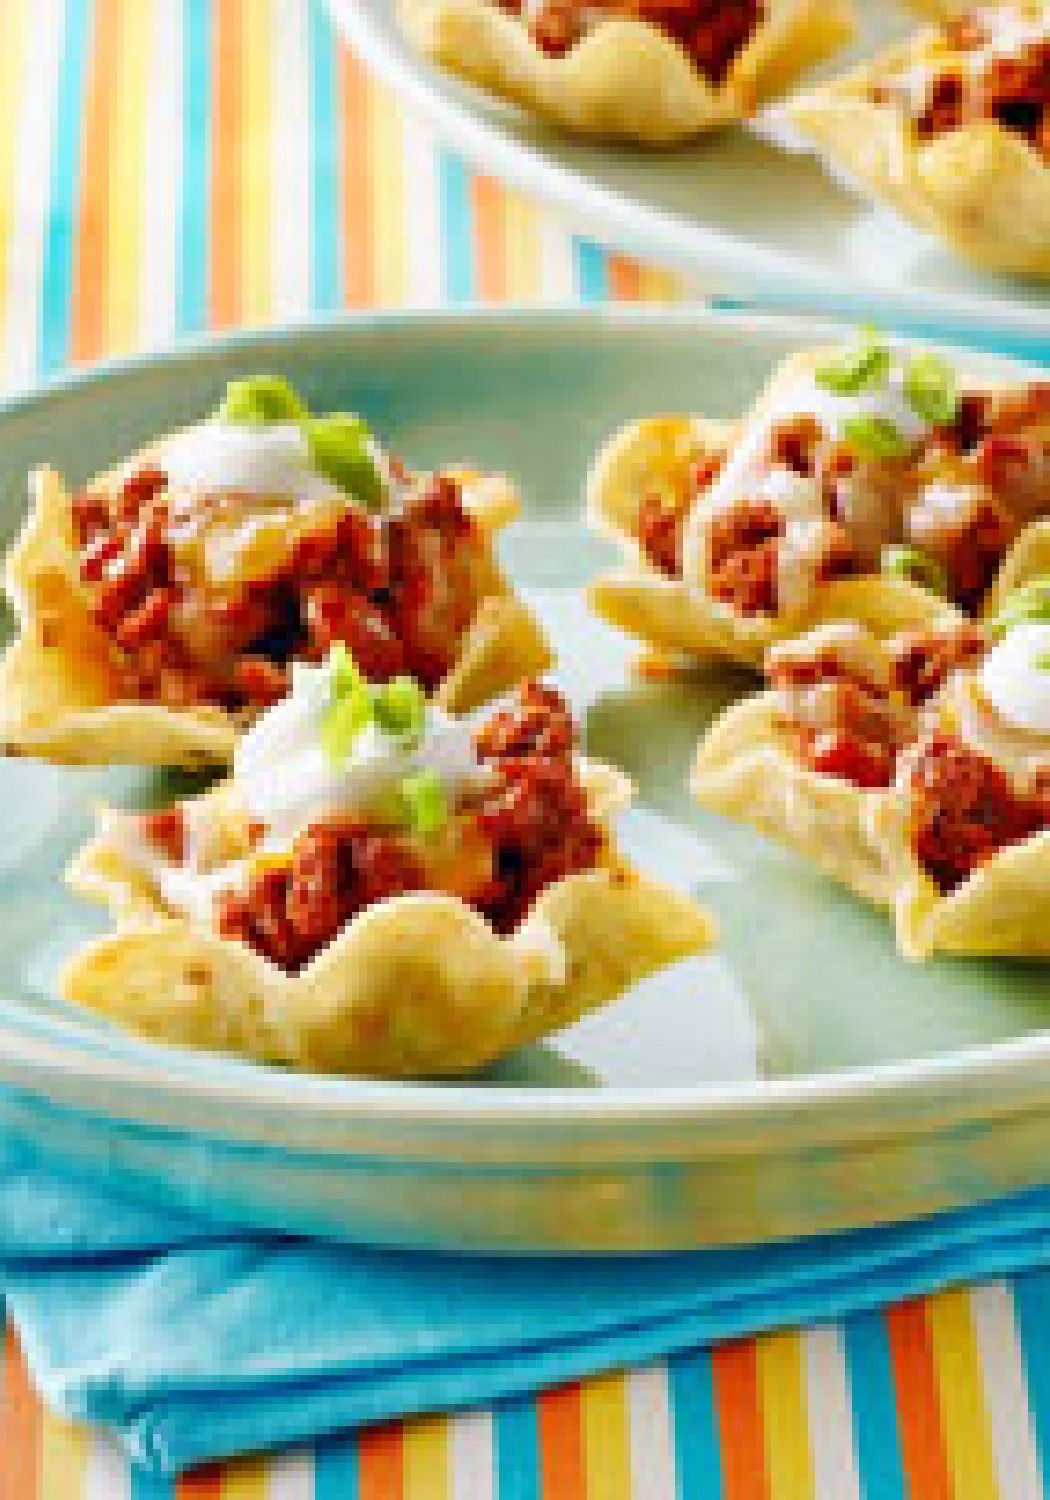 Ground Beef Appetizer Recipes
 Tortilla Appetizer Bites – Made with ground beef salsa